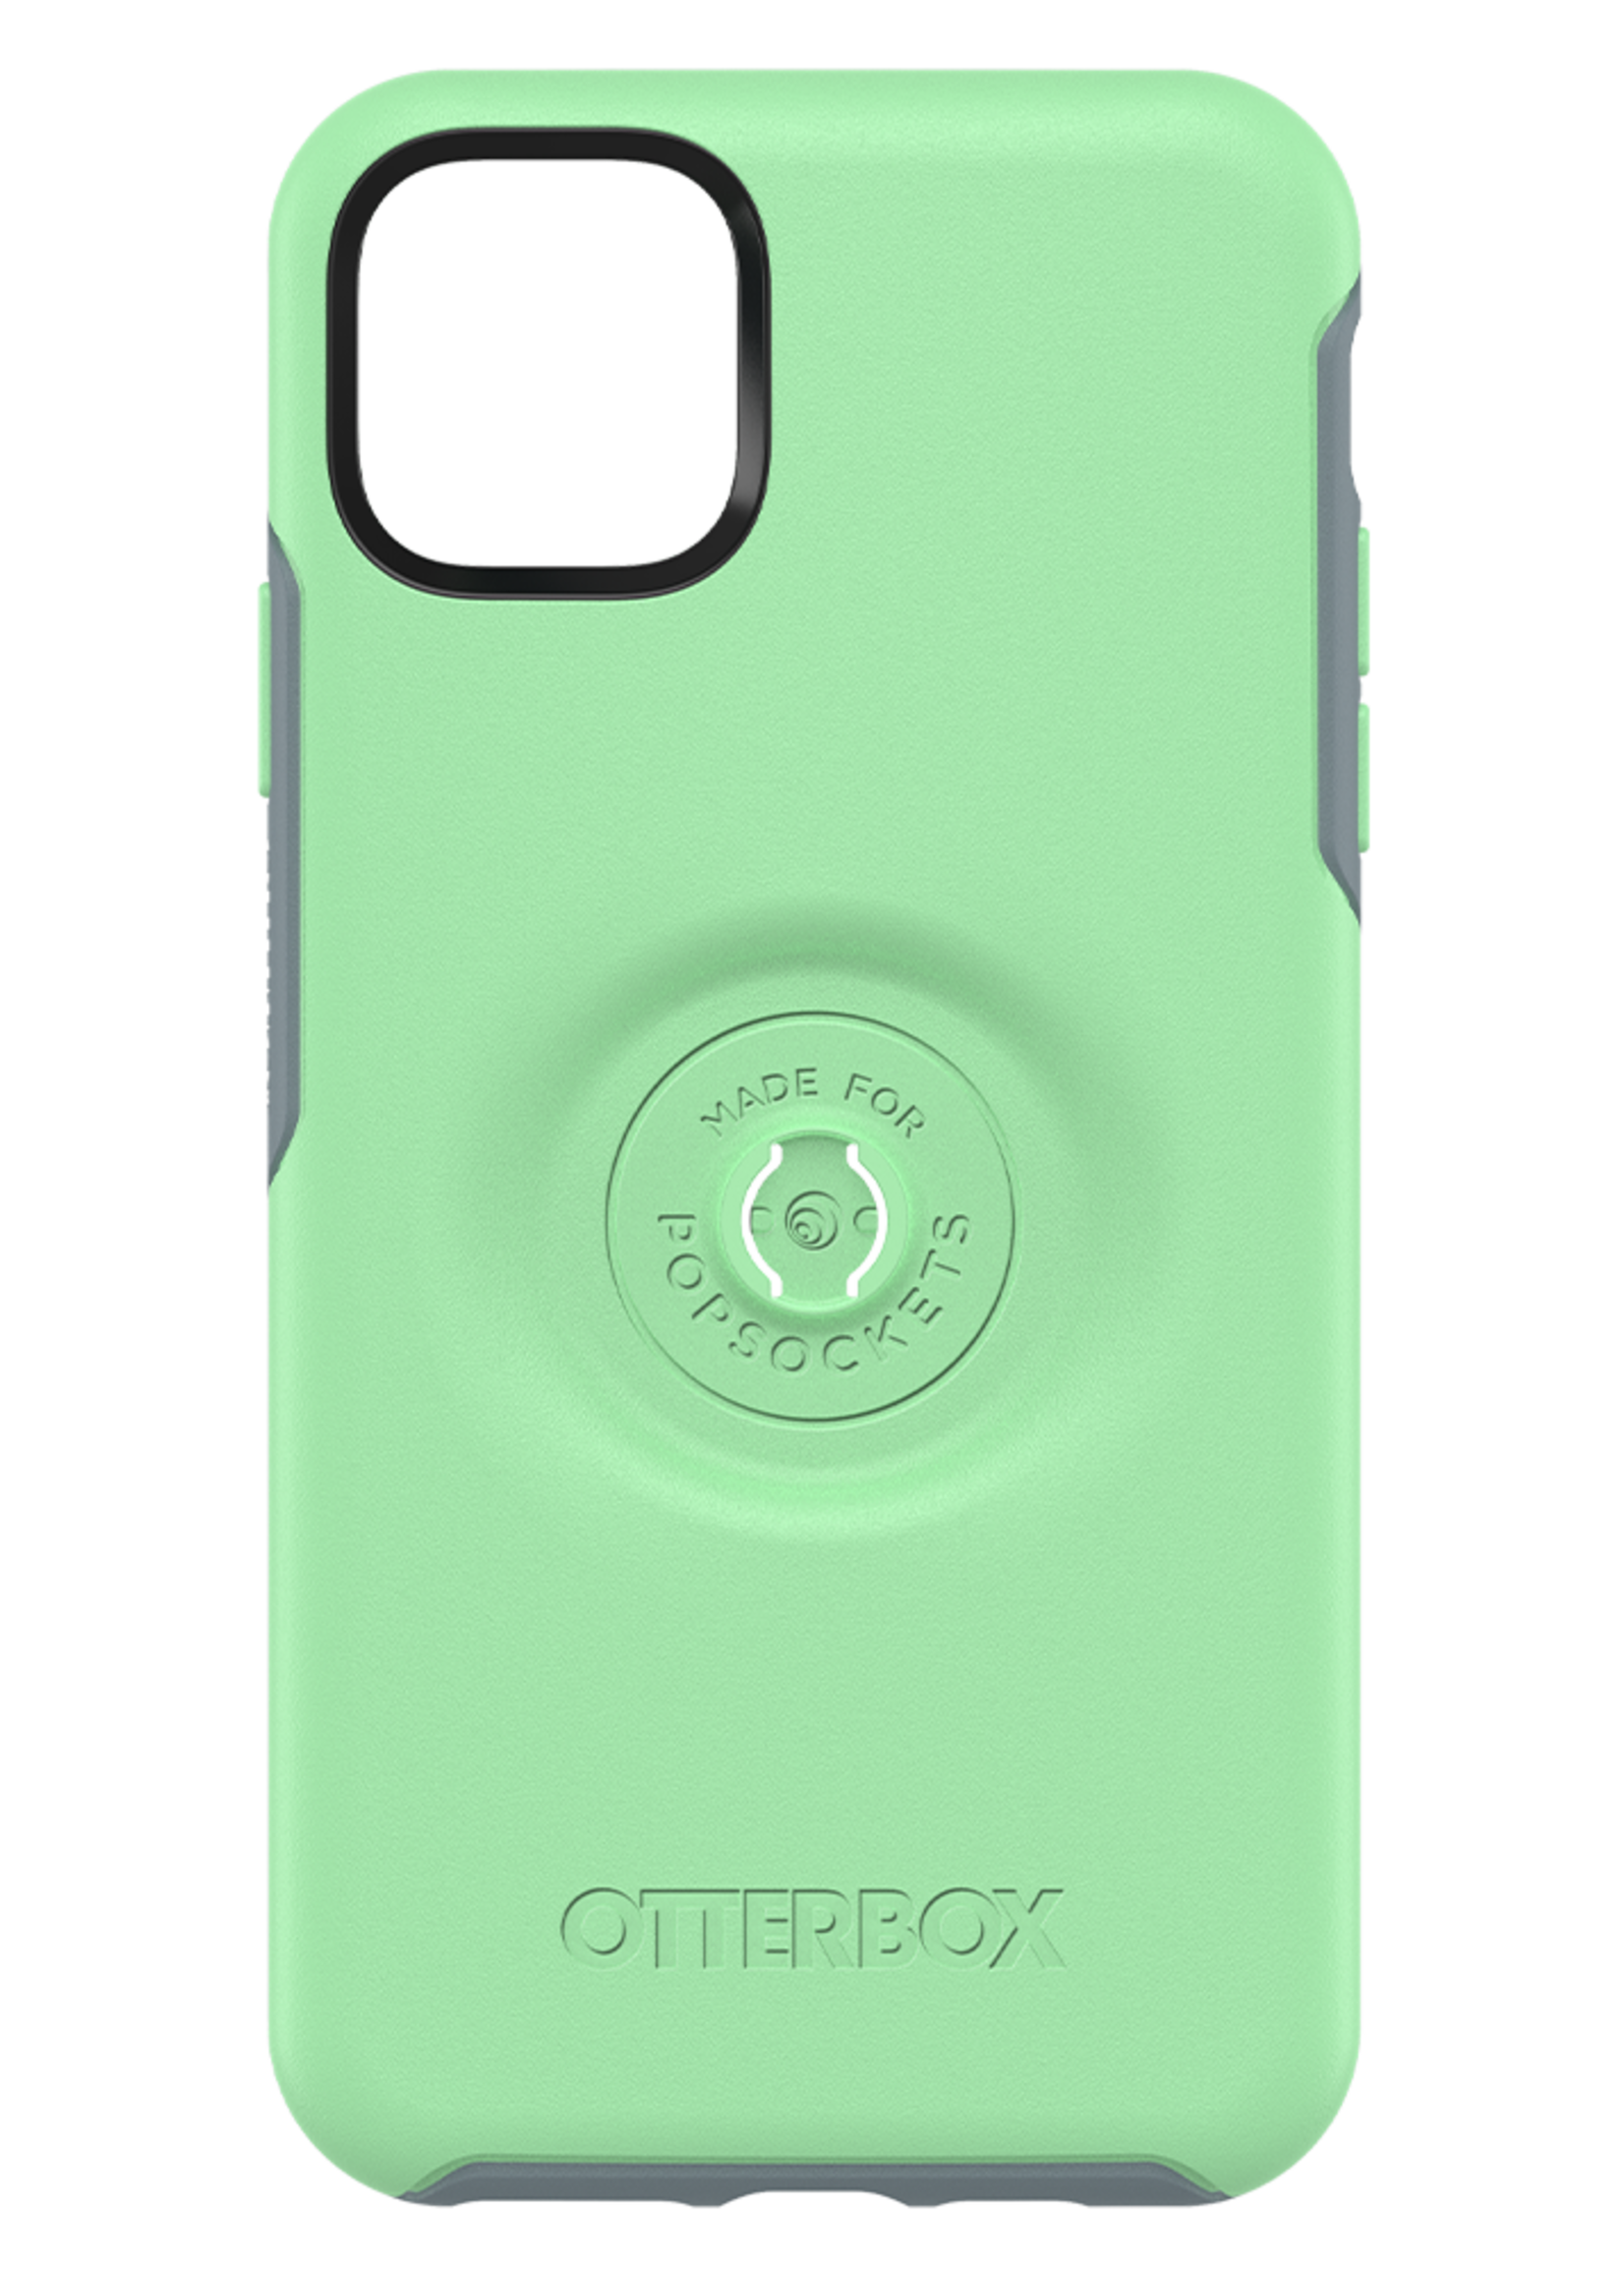 Otterbox OtterBox - Otter + Pop Symmetry Case with PopGrip for Apple iPhone 11 Pro Max - Mint to Be